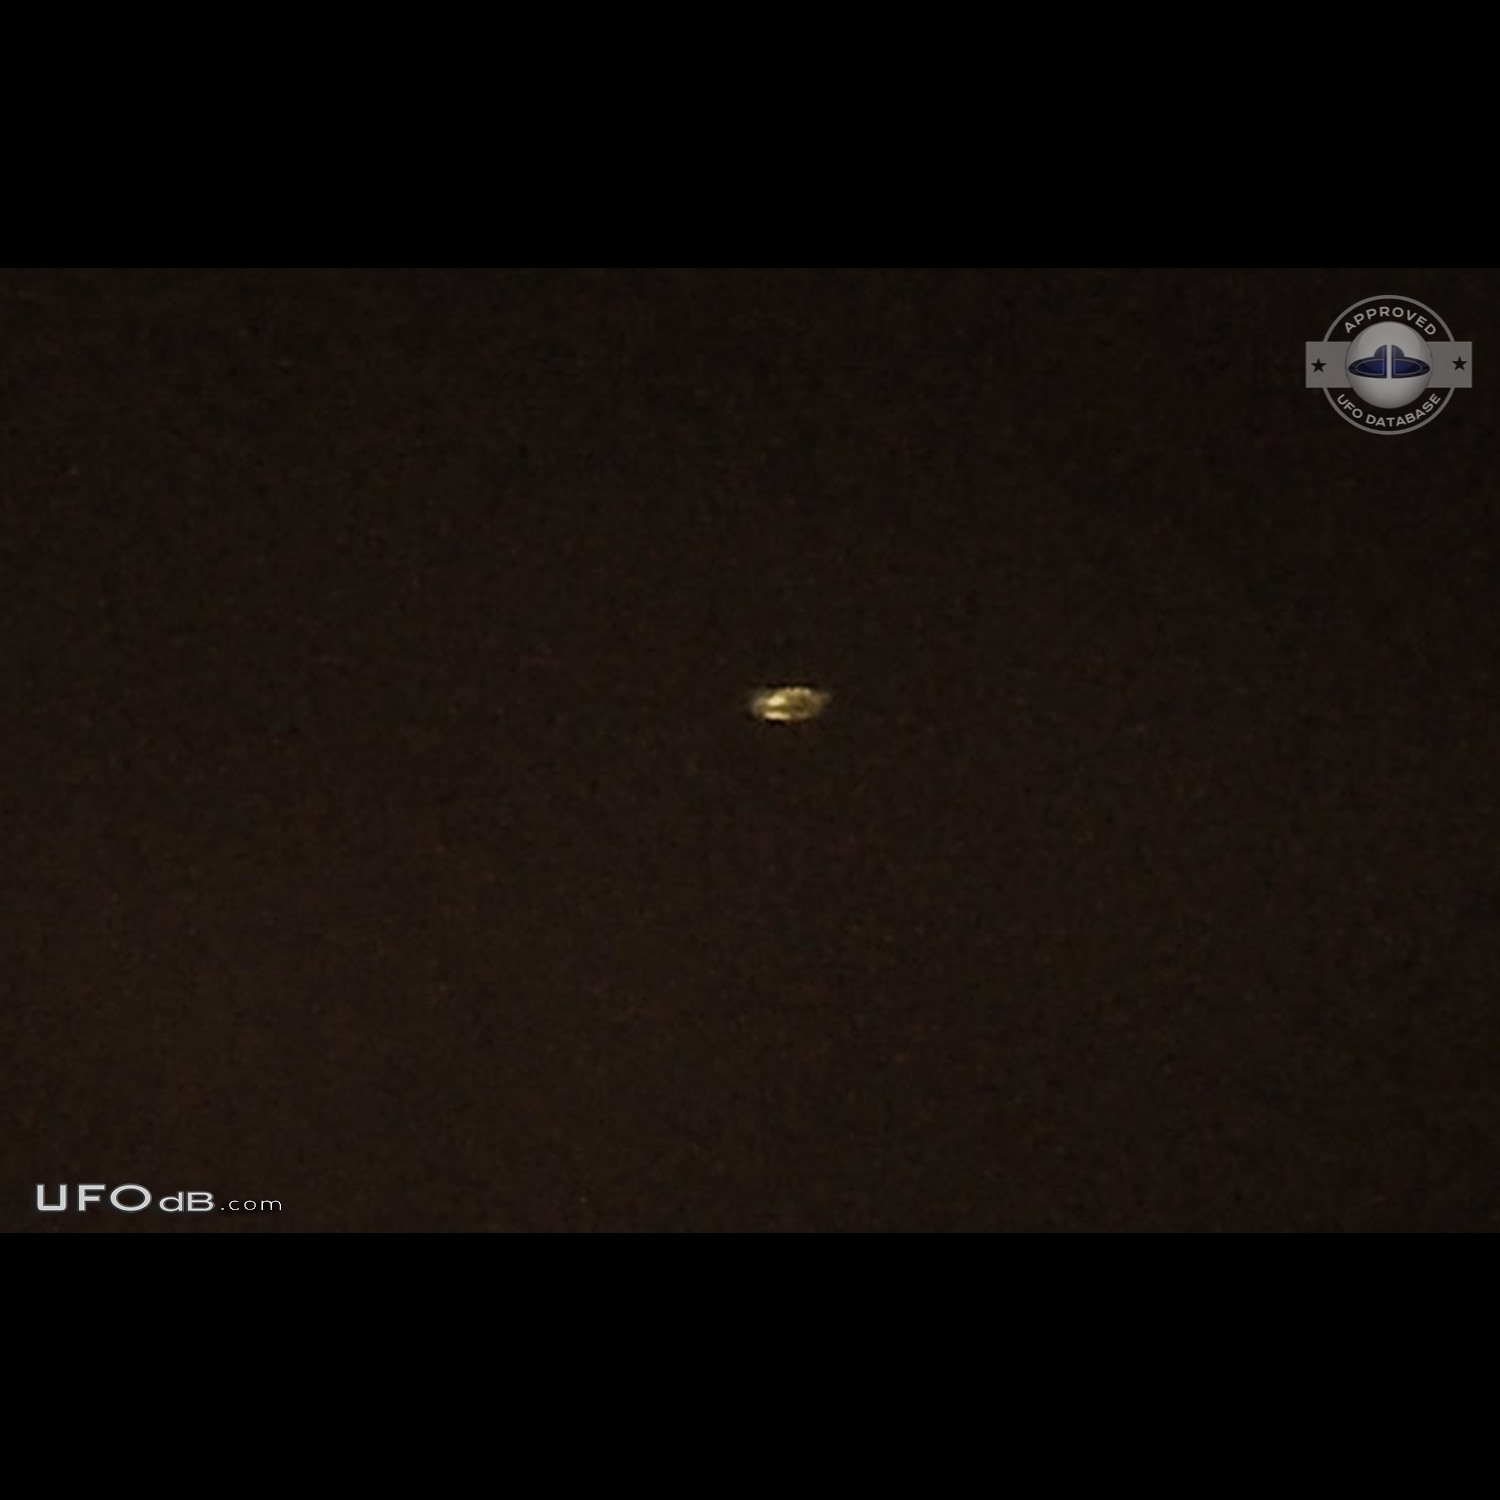 Distance UFO sighting, Appears to be circular shape - Tennessee 2014 UFO Picture #700-1